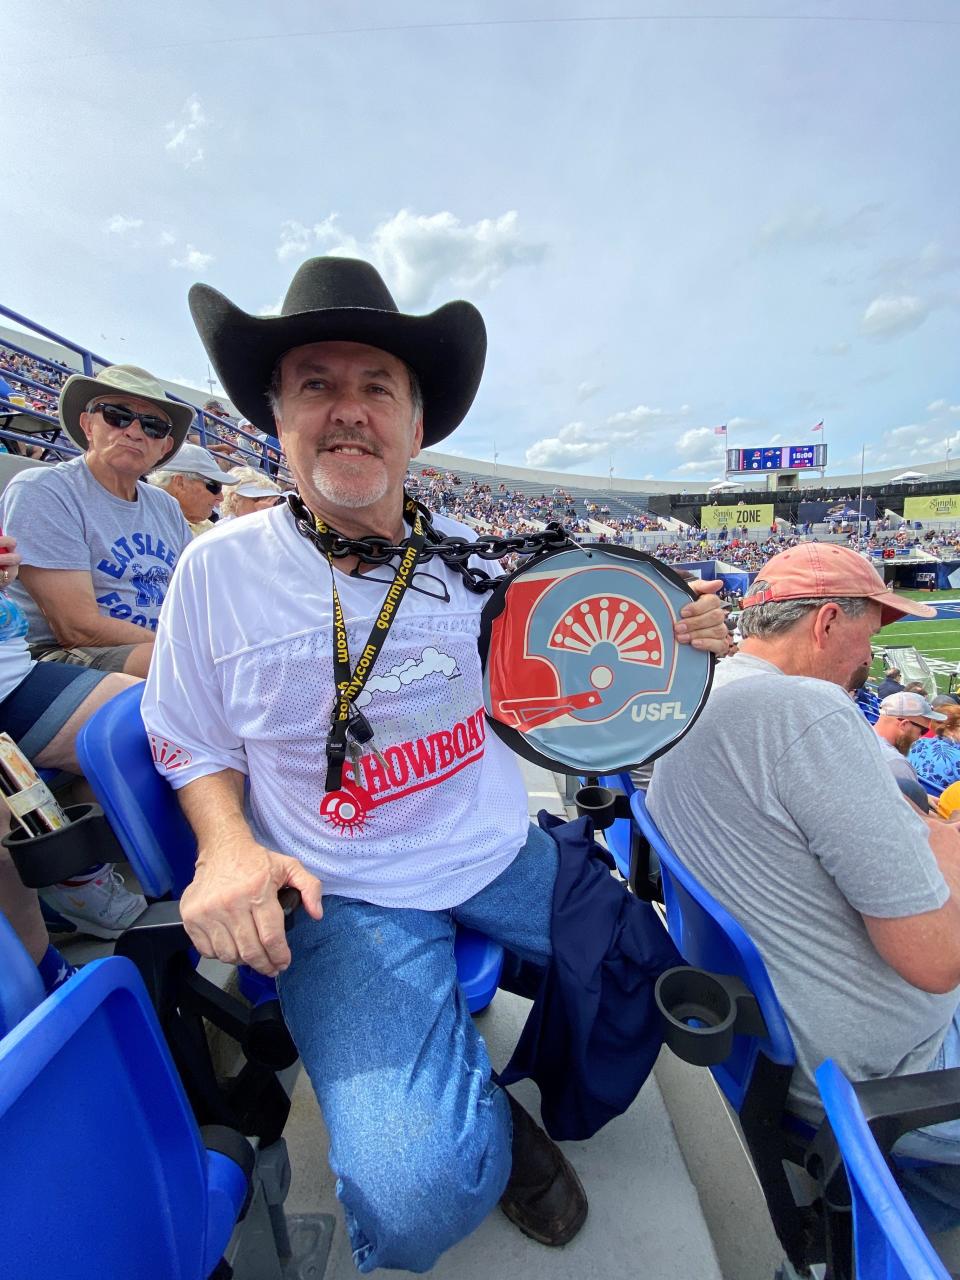 Memphis Showboats fan Ken Brasel shows off some memorabilia from the original Showboats franchise, which played in Memphis in the mid-1980s.